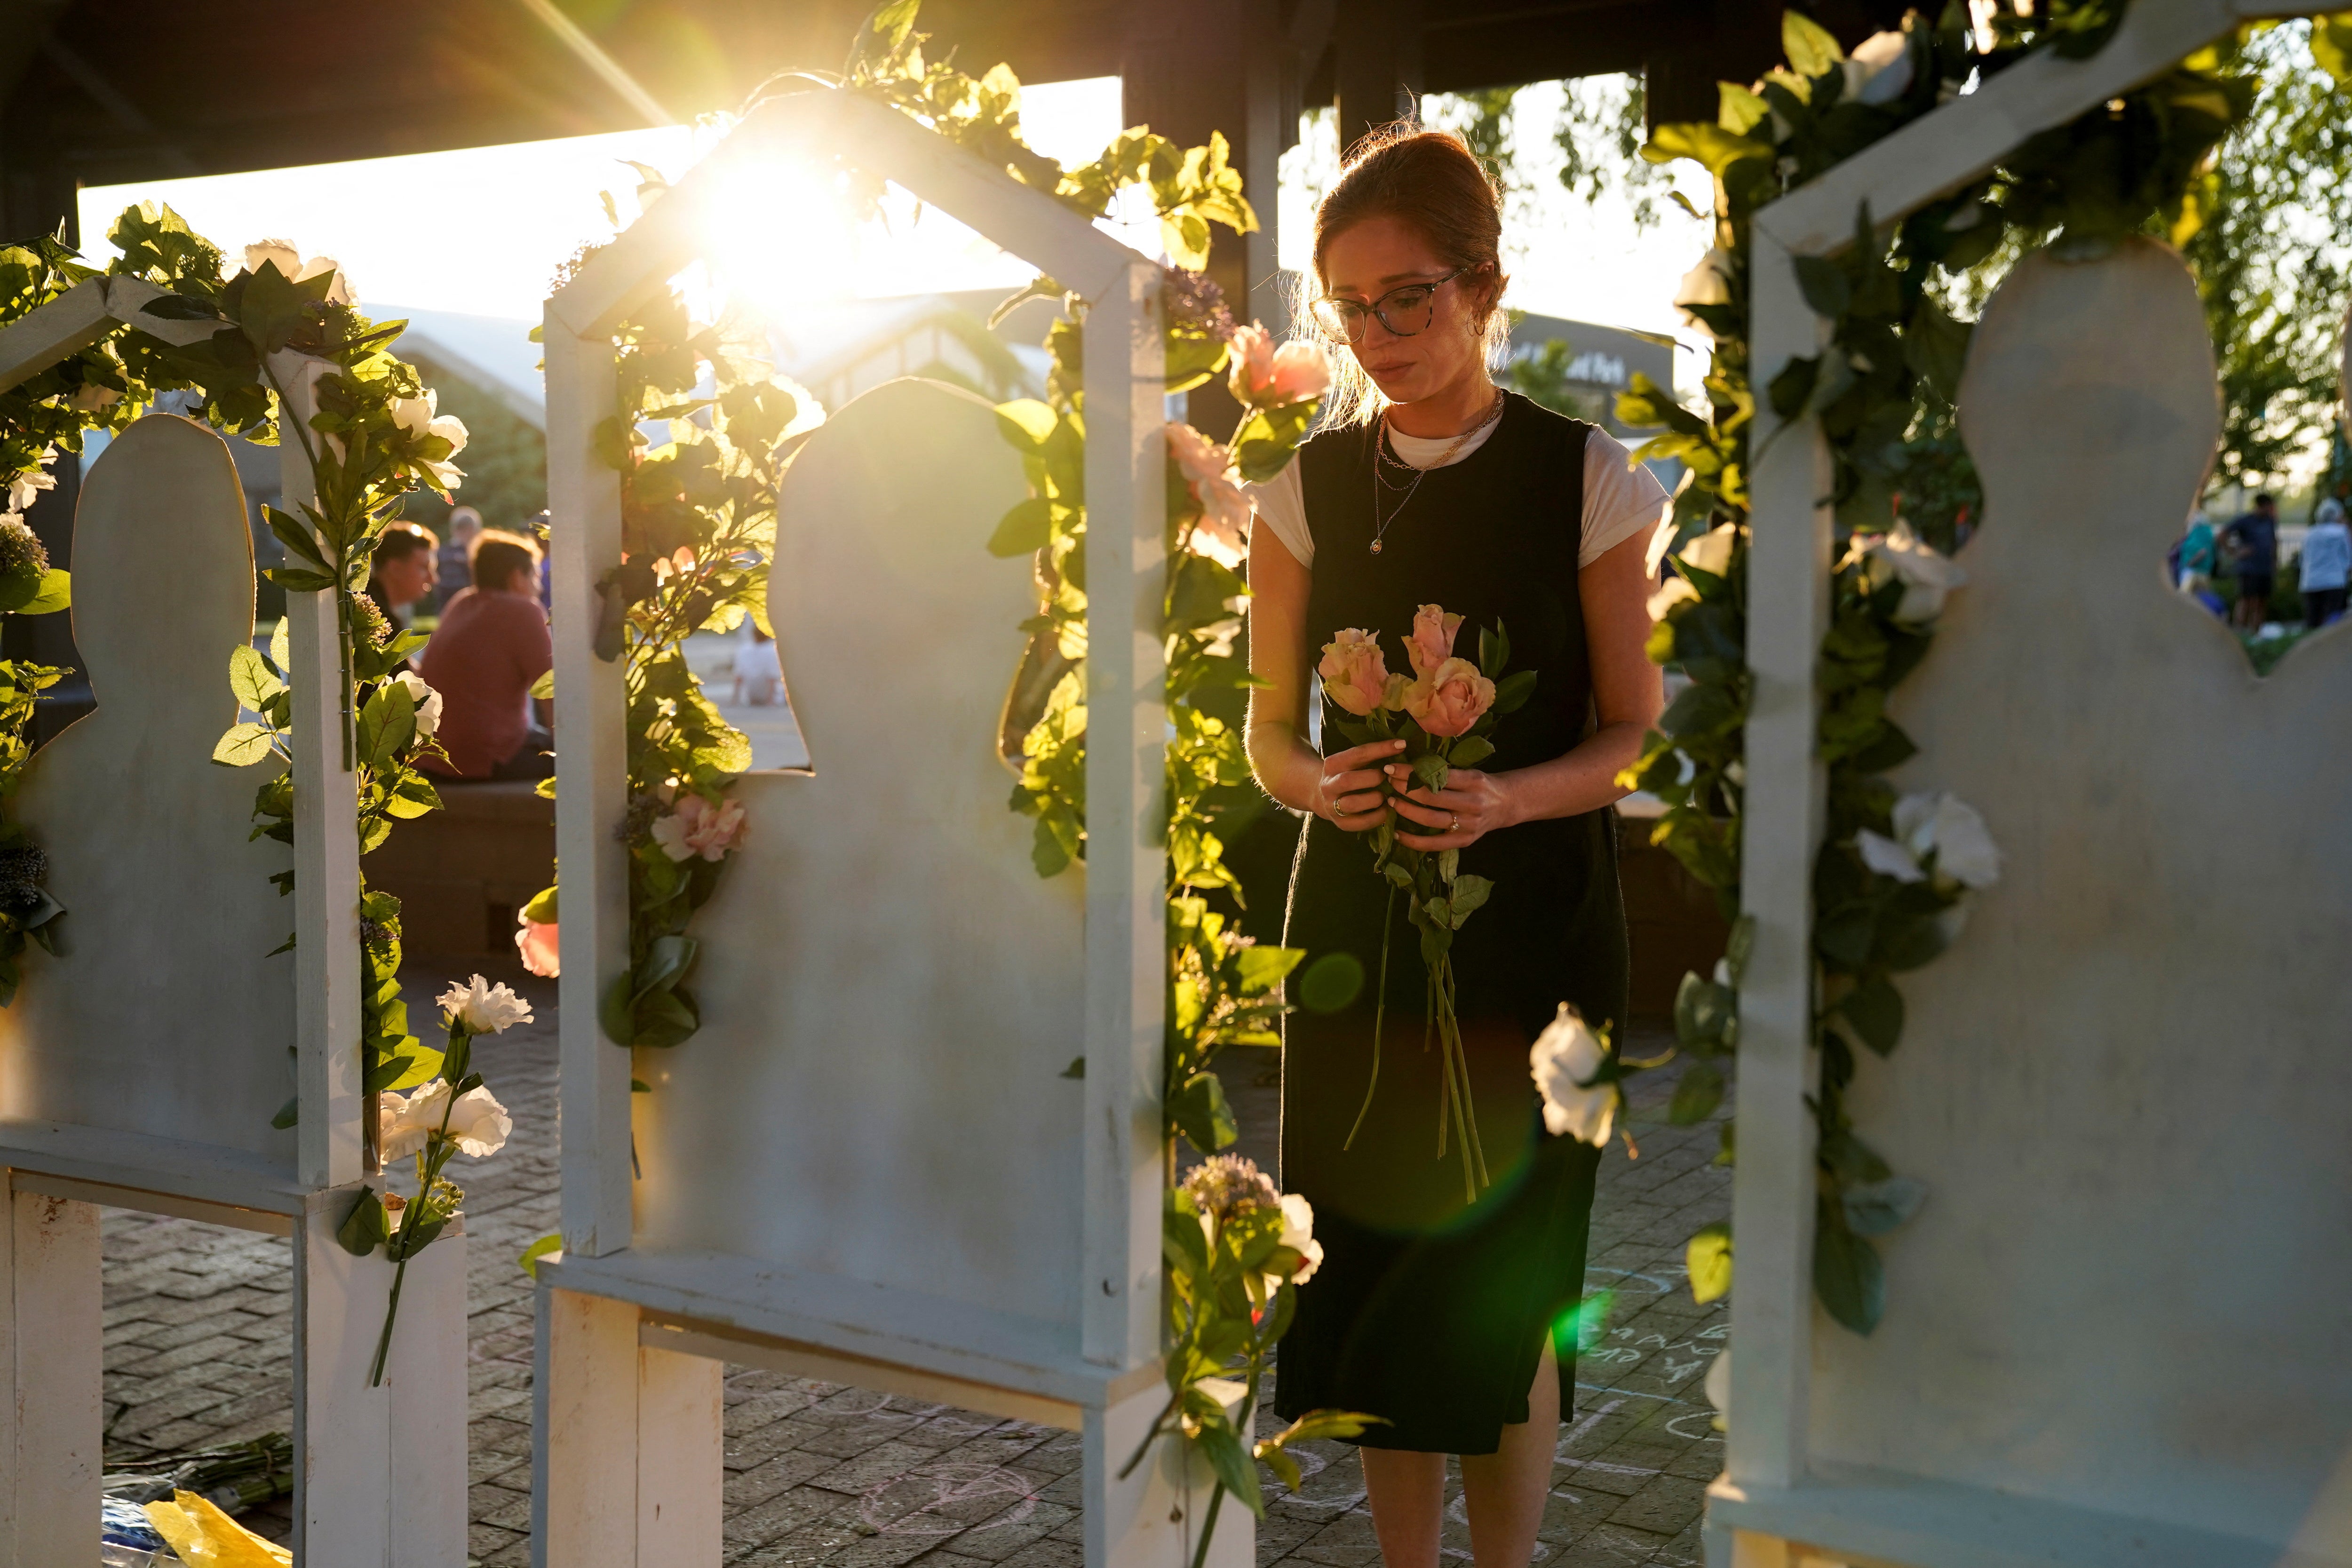 A mourner visits a memorial for victims—she holds roses that she is placing in front of the cardboard cut outs of each victim.